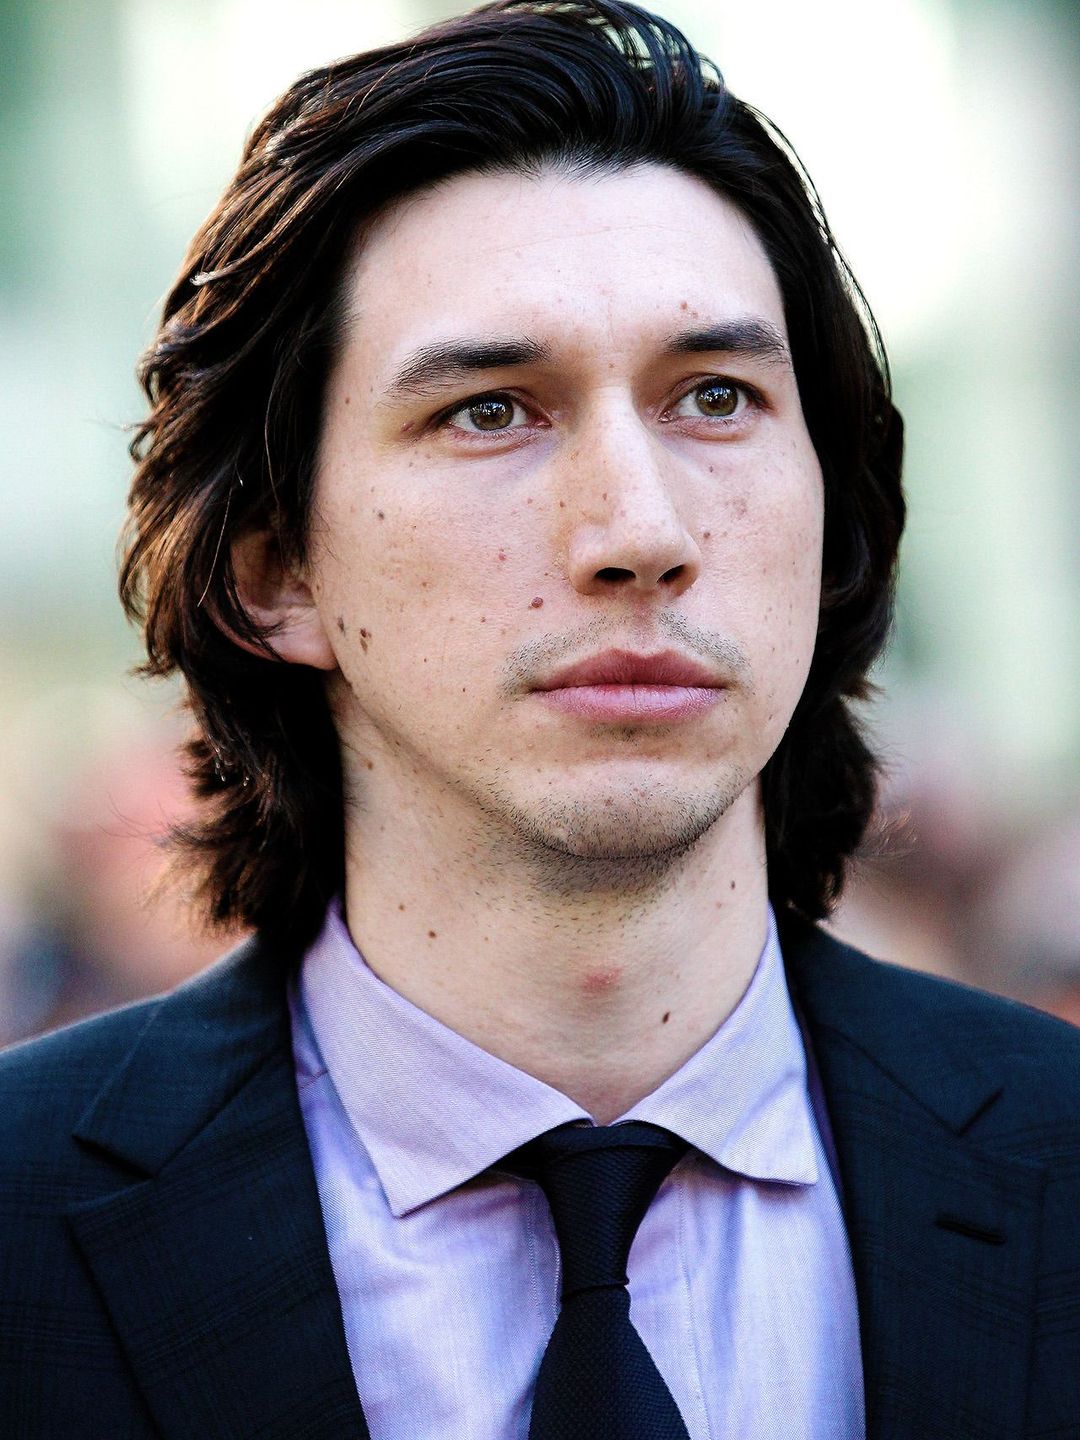 Adam Driver young age